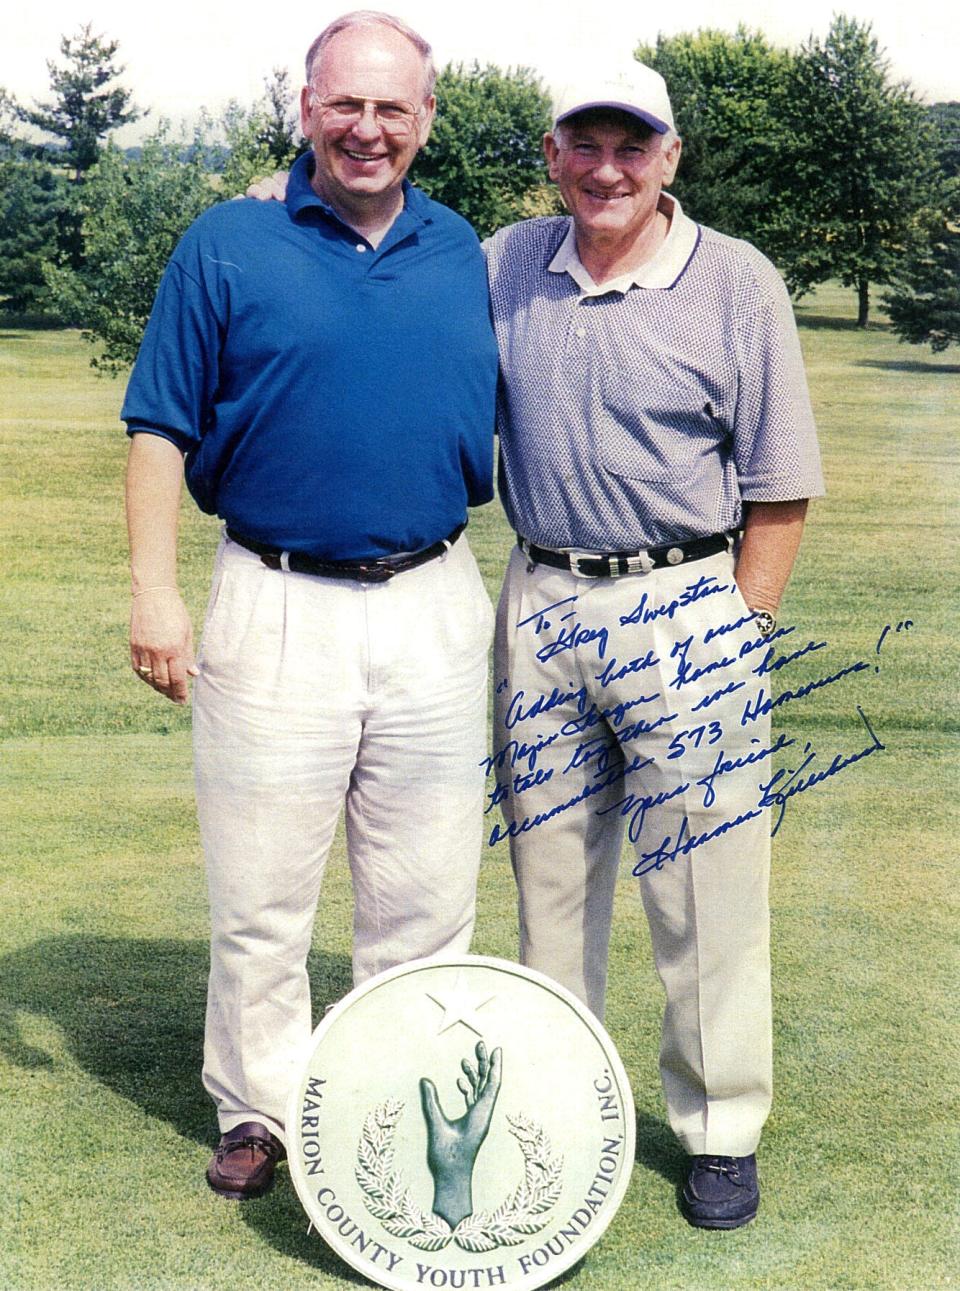 Greg Swepston, left, is pictured with Major League Baseball Hall of Fame member Harmon Killebrew one year at the Marion County Youth Foundation's Charity Celebrity Golf Outing fundraiser. The inscription to him on this picture reads, "Adding both our Major League home run totals together, we have accumulated 573 homeruns!" Besides being a coach, teacher and administrator at Marion Harding, Swepston worked for decades as a pro baseball scout.